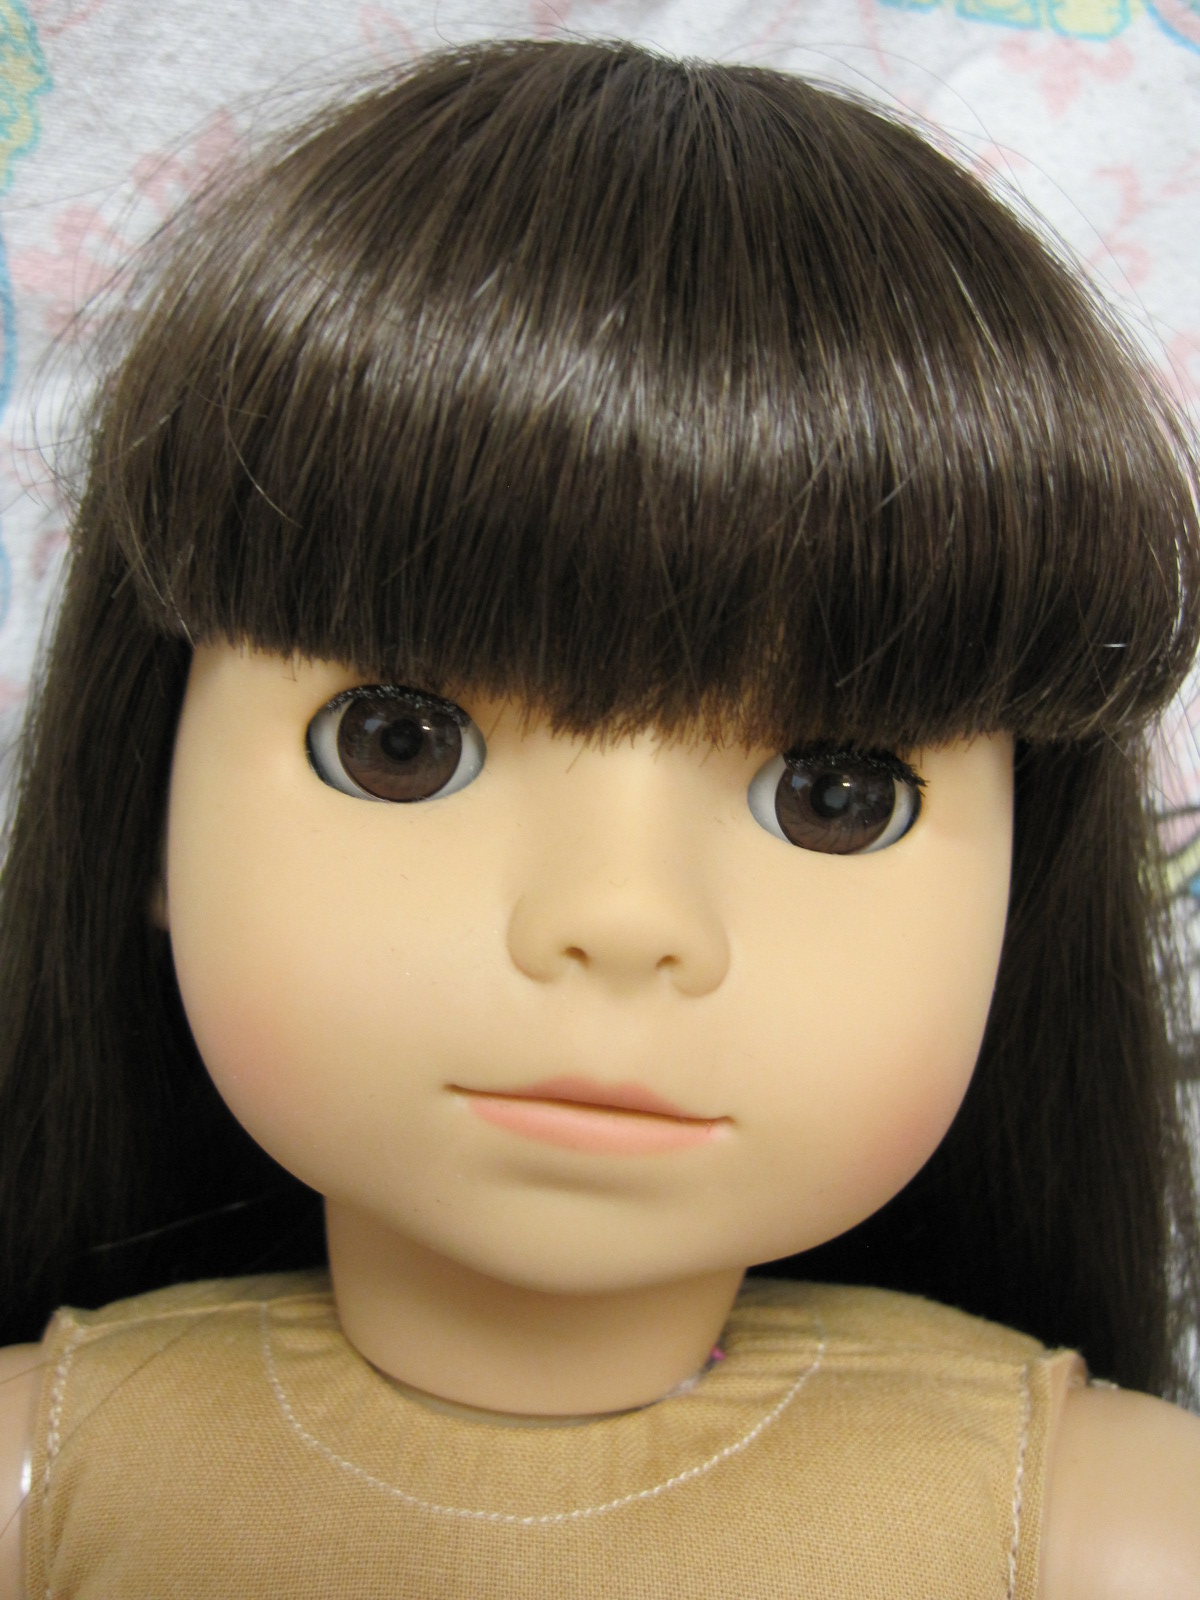 Never Grow Up: A Mom's Guide to Dolls and More: A New Doll Comparison Post